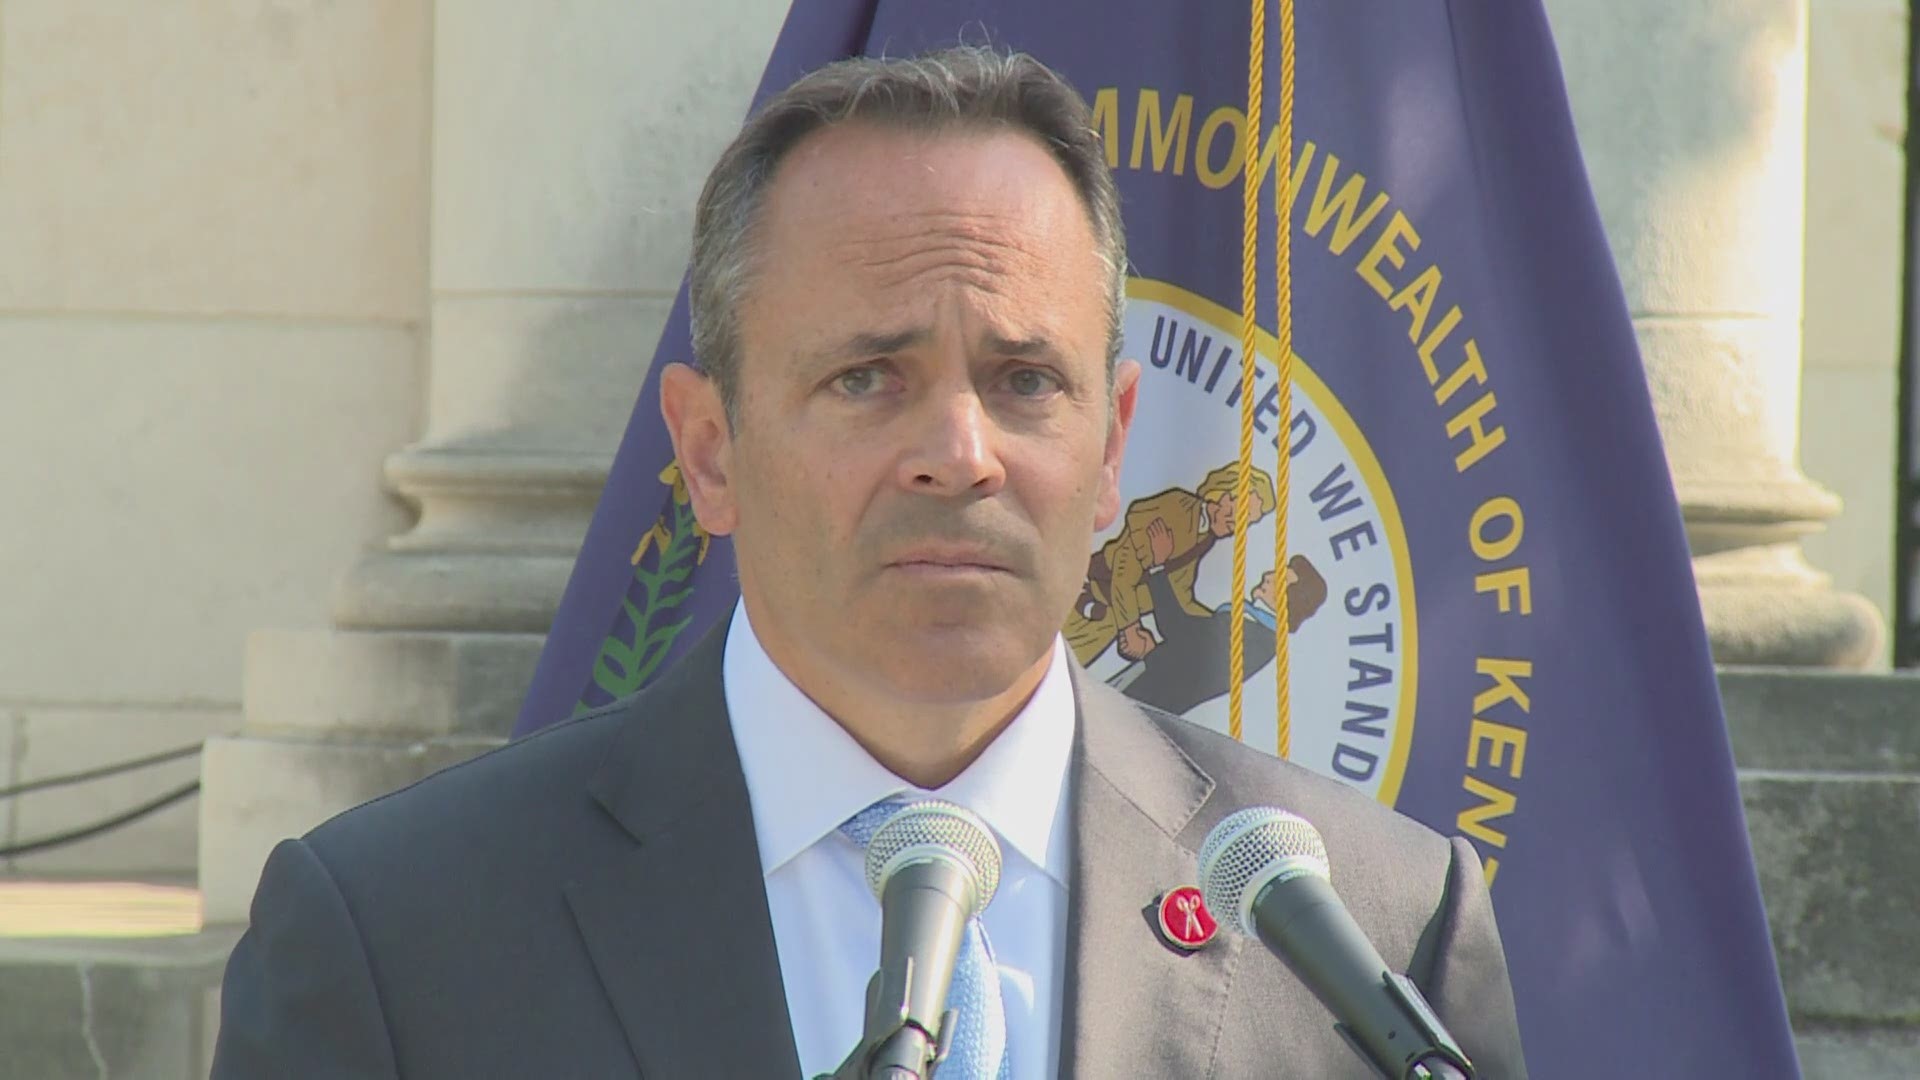 Bevin's original comments have come under criticism by many who suggest statistics do not back the suicide rate he cited.